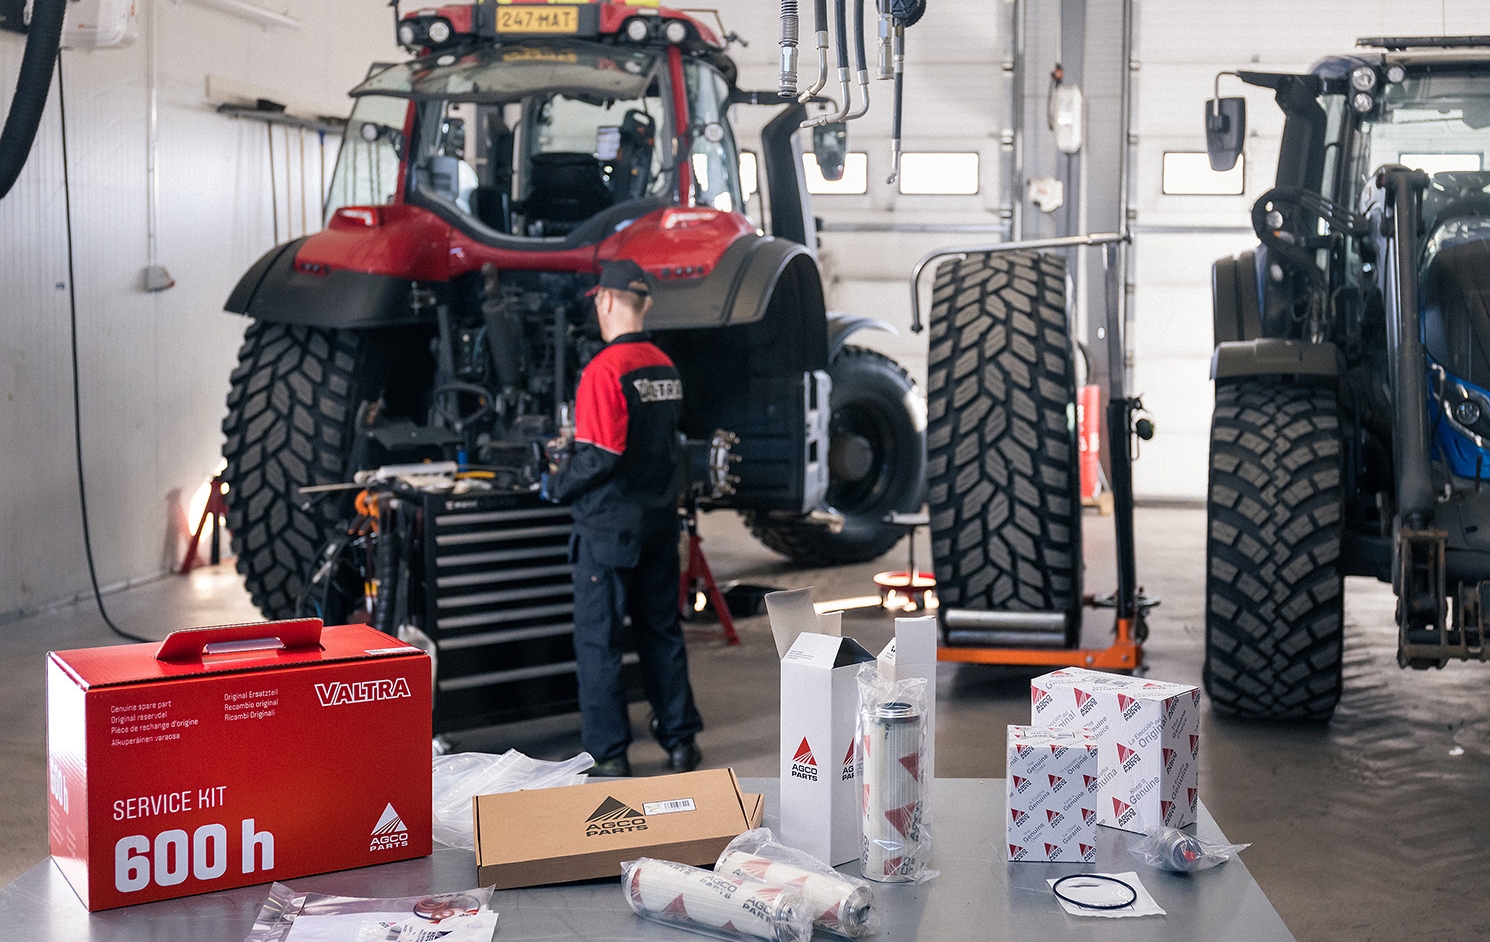 Genuine spare parts installed by an authorised service dealer are safe and optimised for Valtra. For example, a universal oil suitable for many uses is always a compromise compared to a lubricant optimised specifically for Valtra.